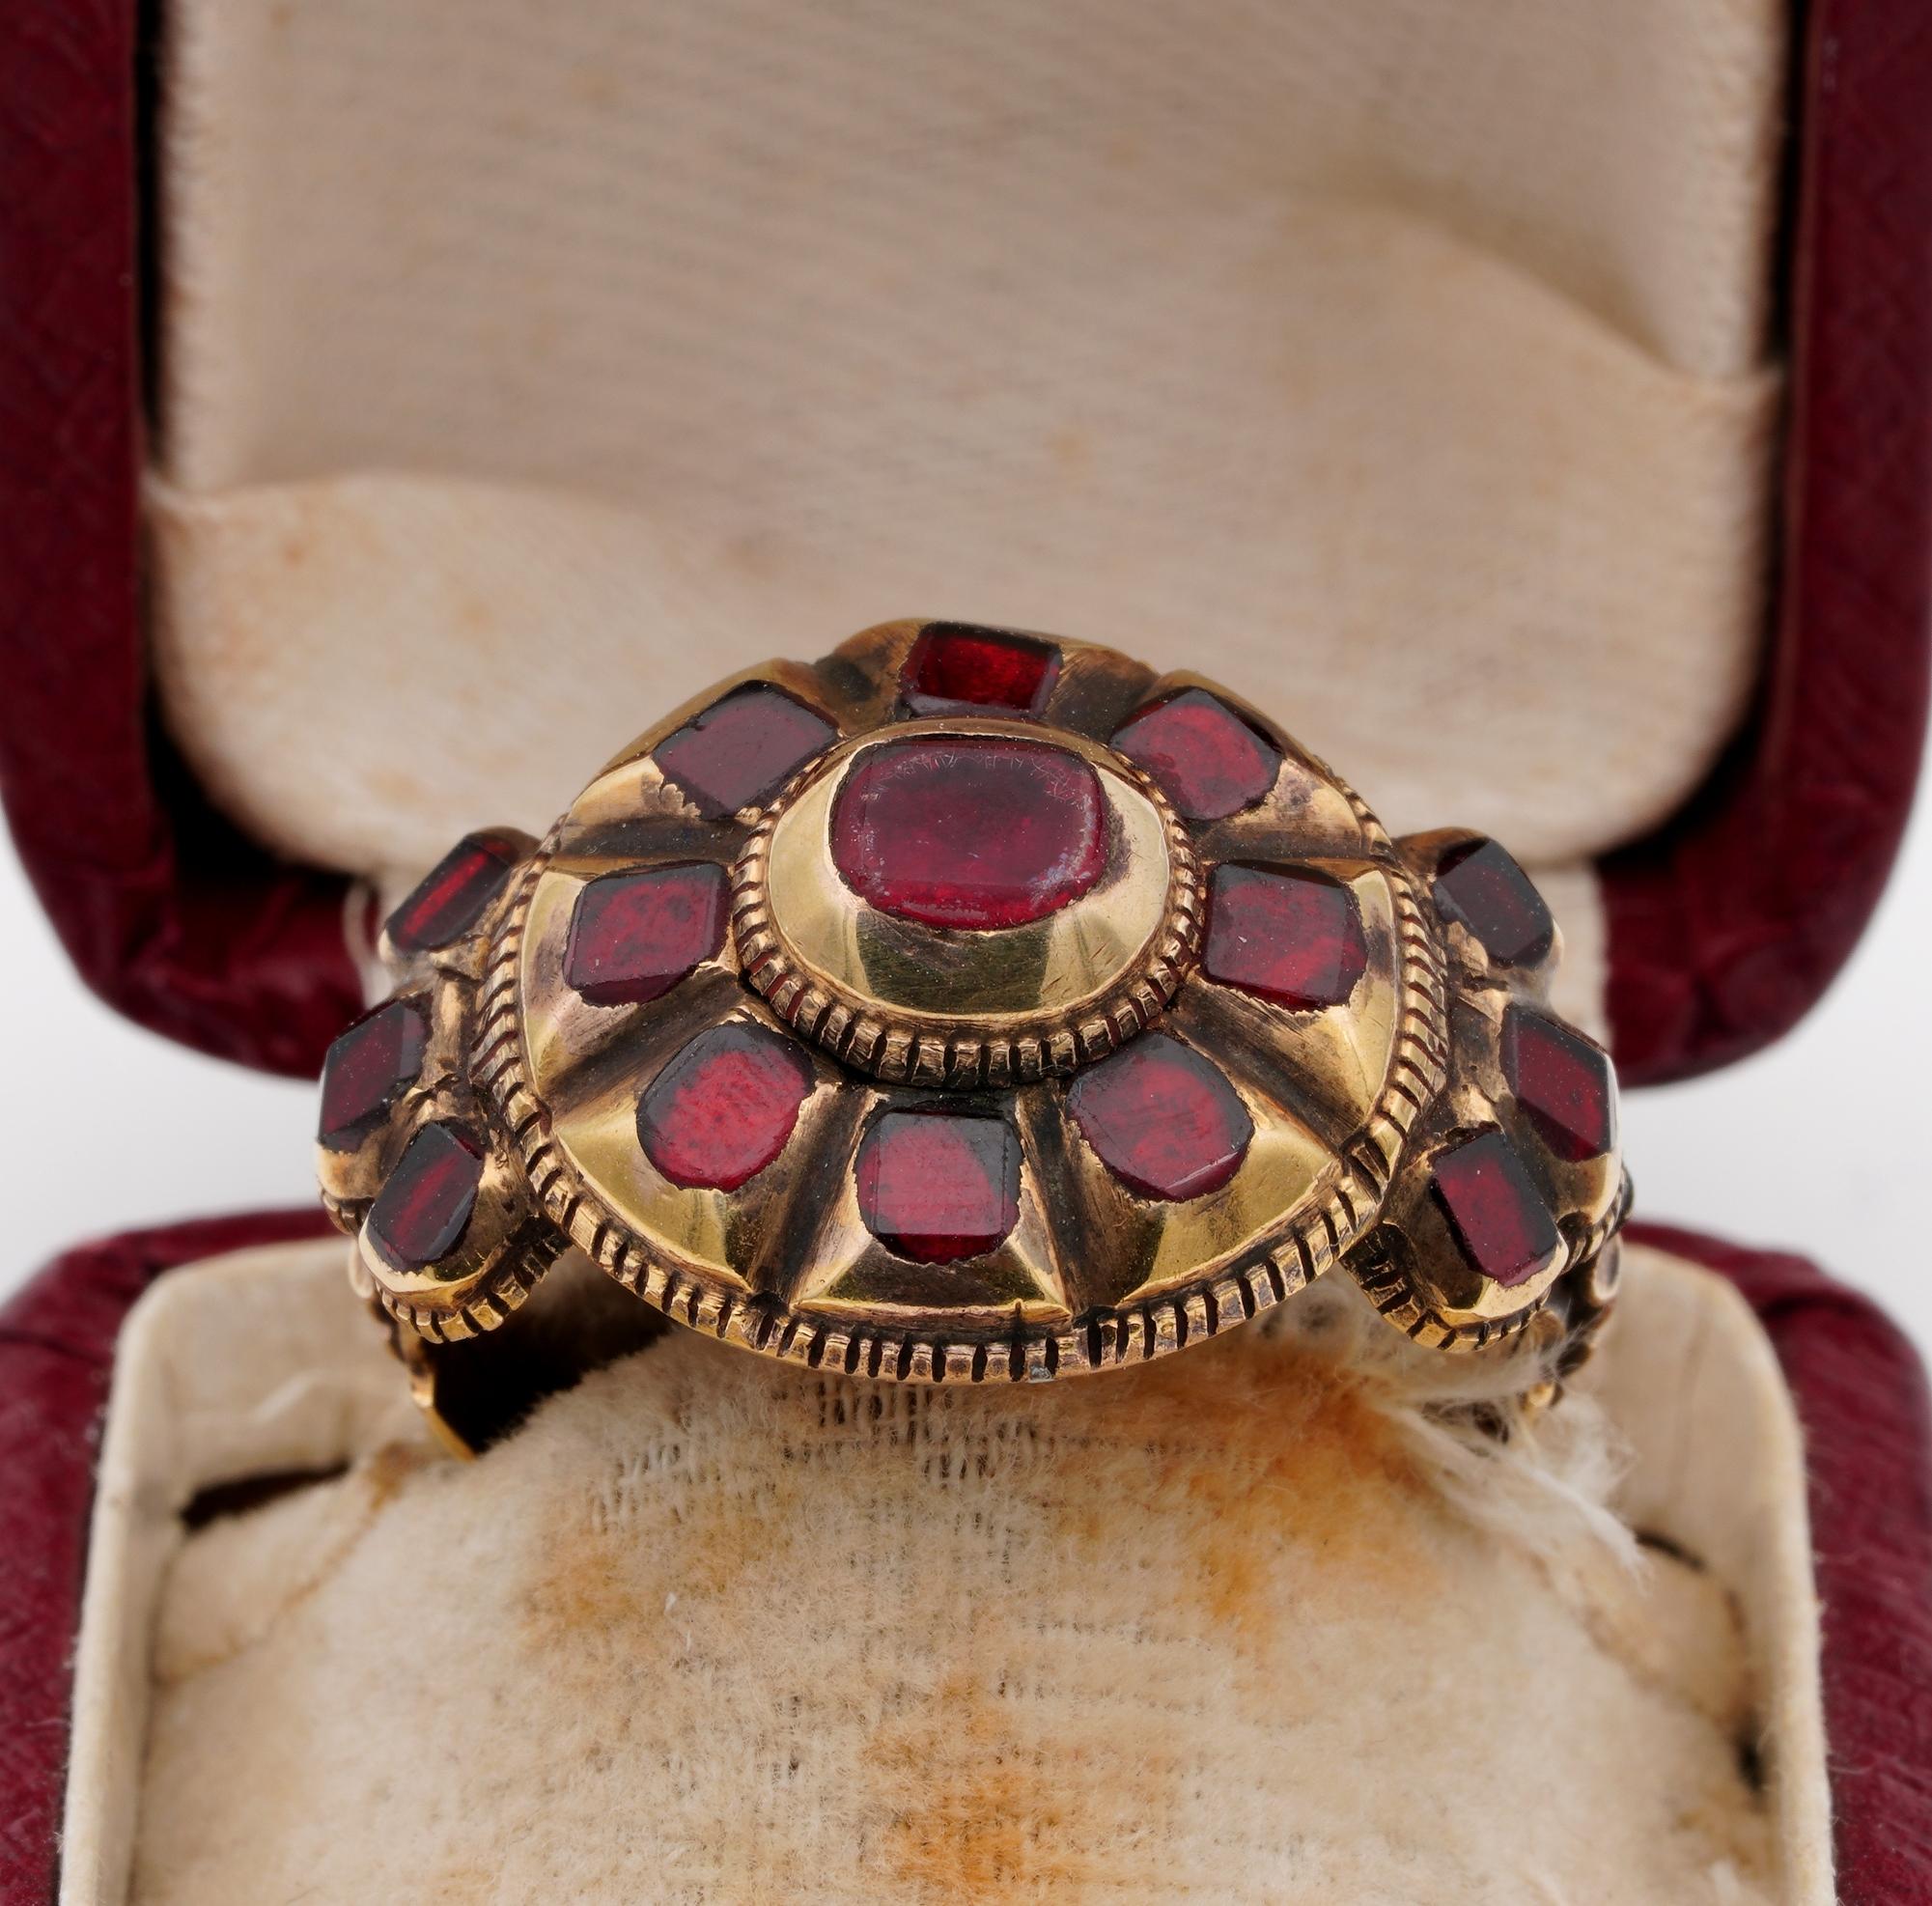 Past Treasures

Marvellous Iberian Georgian period flower ring, hand crafted during 18 Th century of solid up to 18 Kt gold – tested- Bears Portuguese hallmarks from the period
Impressive flower head of very low profile adorned with flat cut Deep